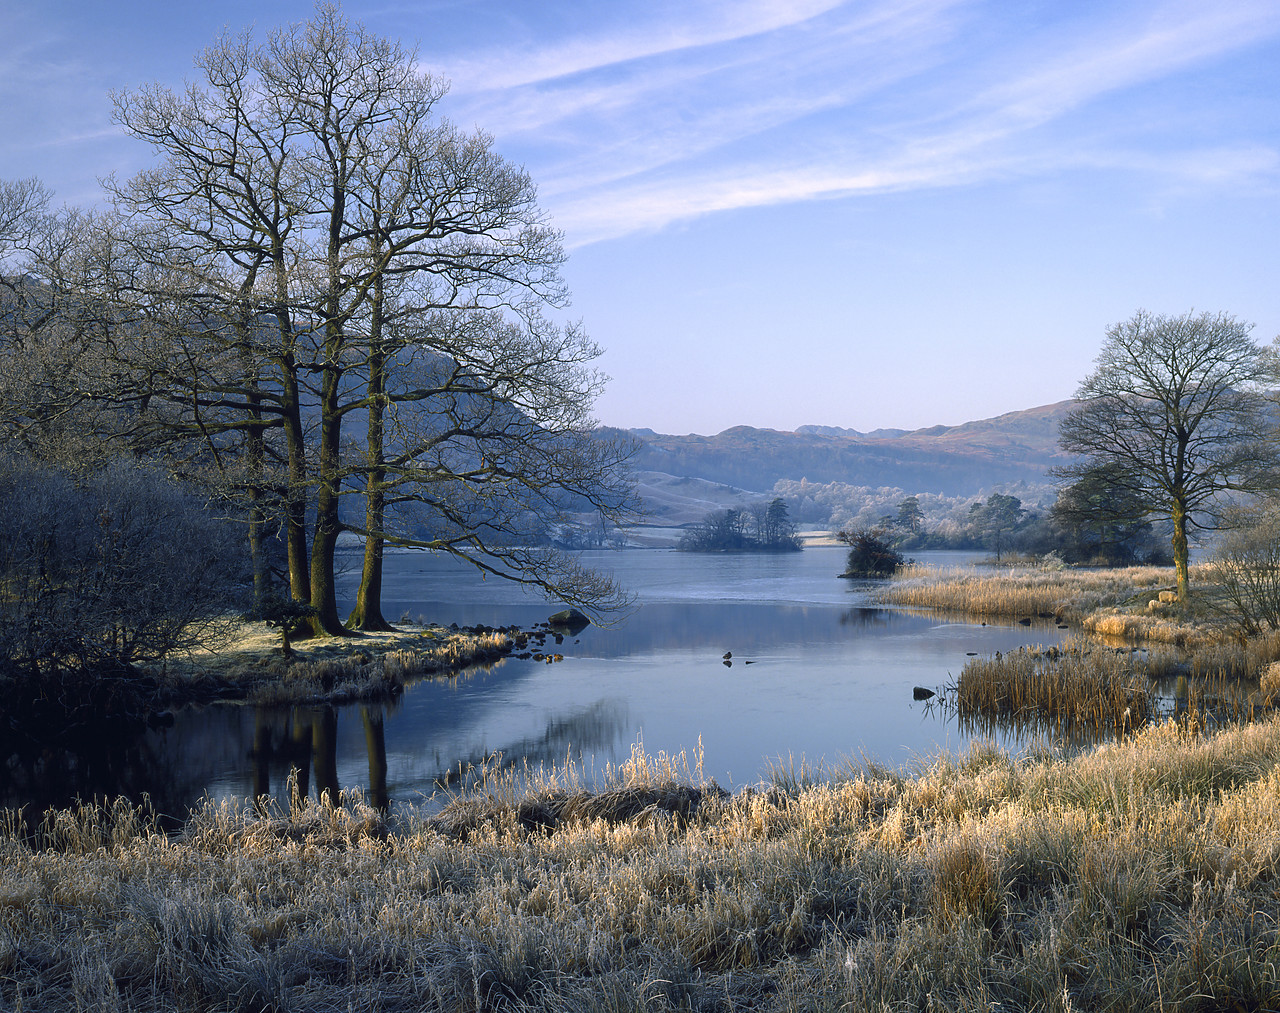 #923920-1 - Rydal Water in Winter, Lake District, Cumbria, England